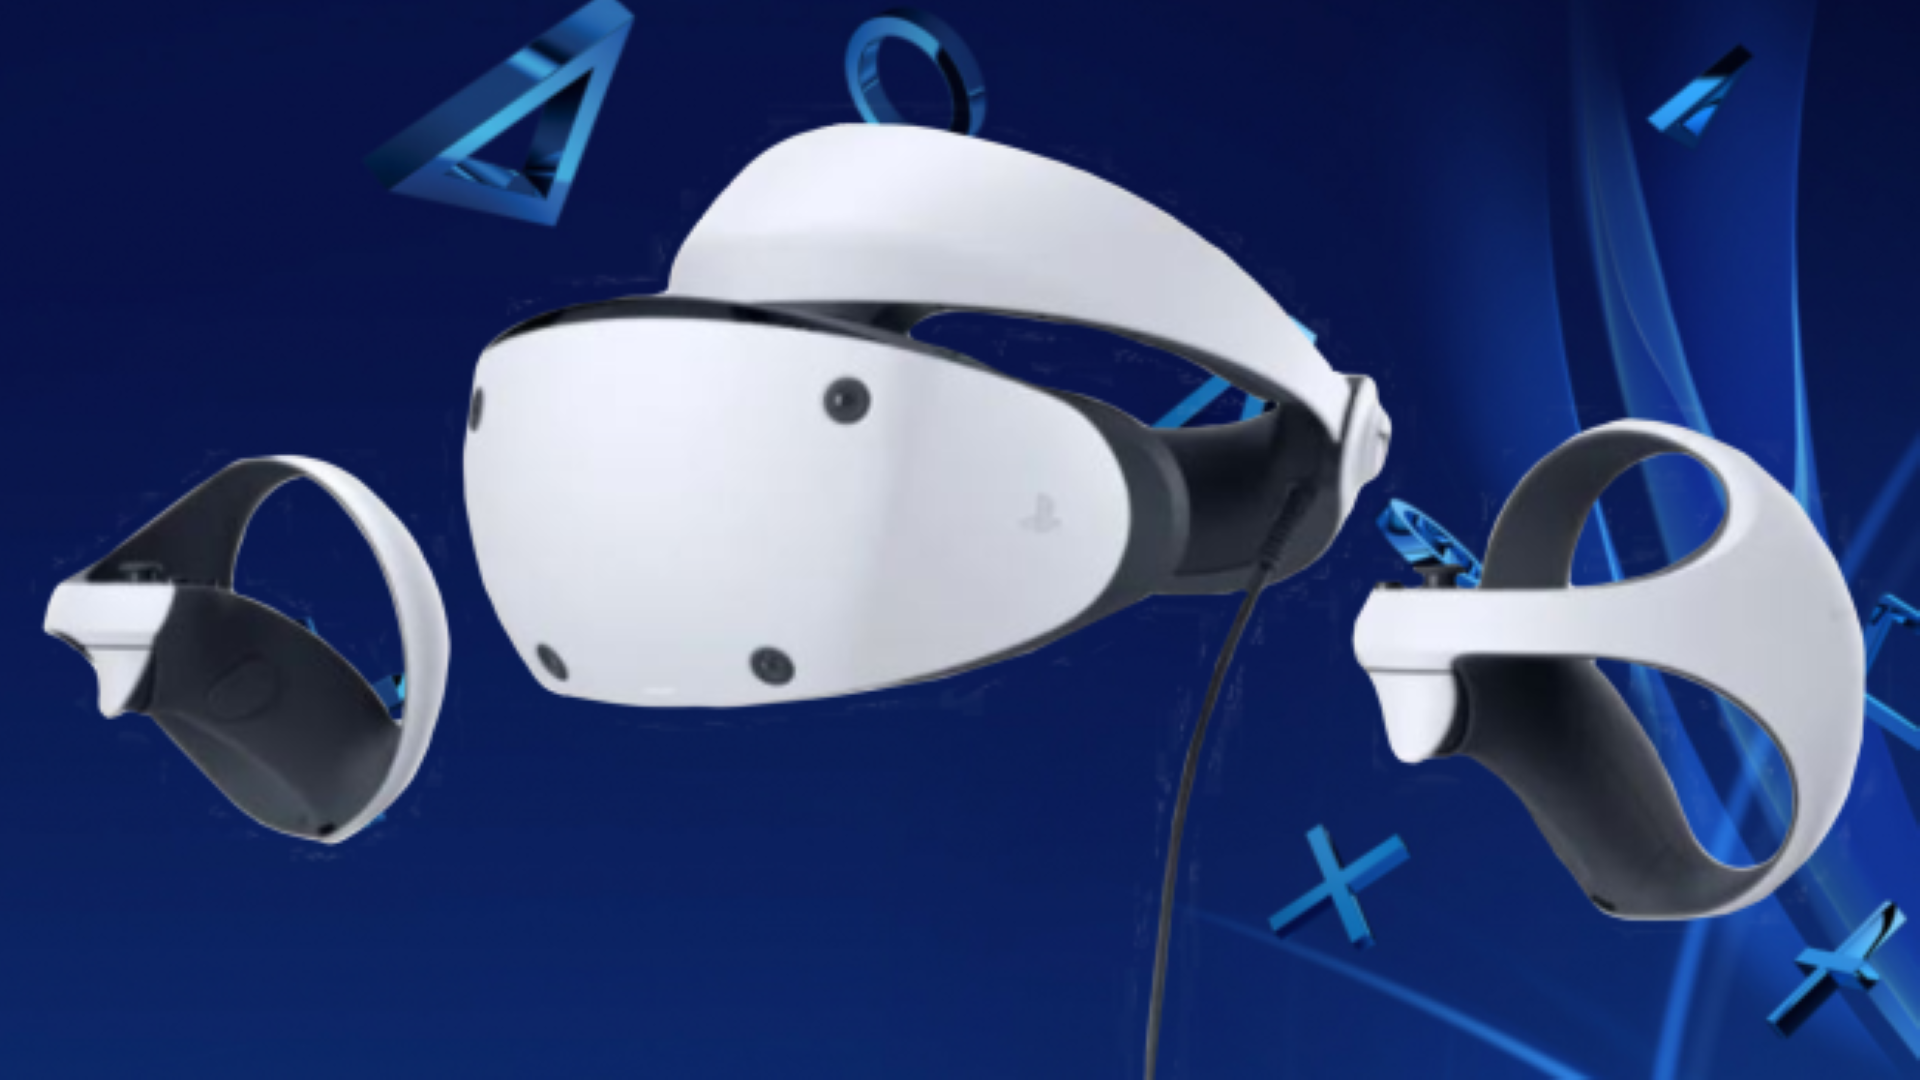 Sony’s new PlayStation VR headset is selling terribly